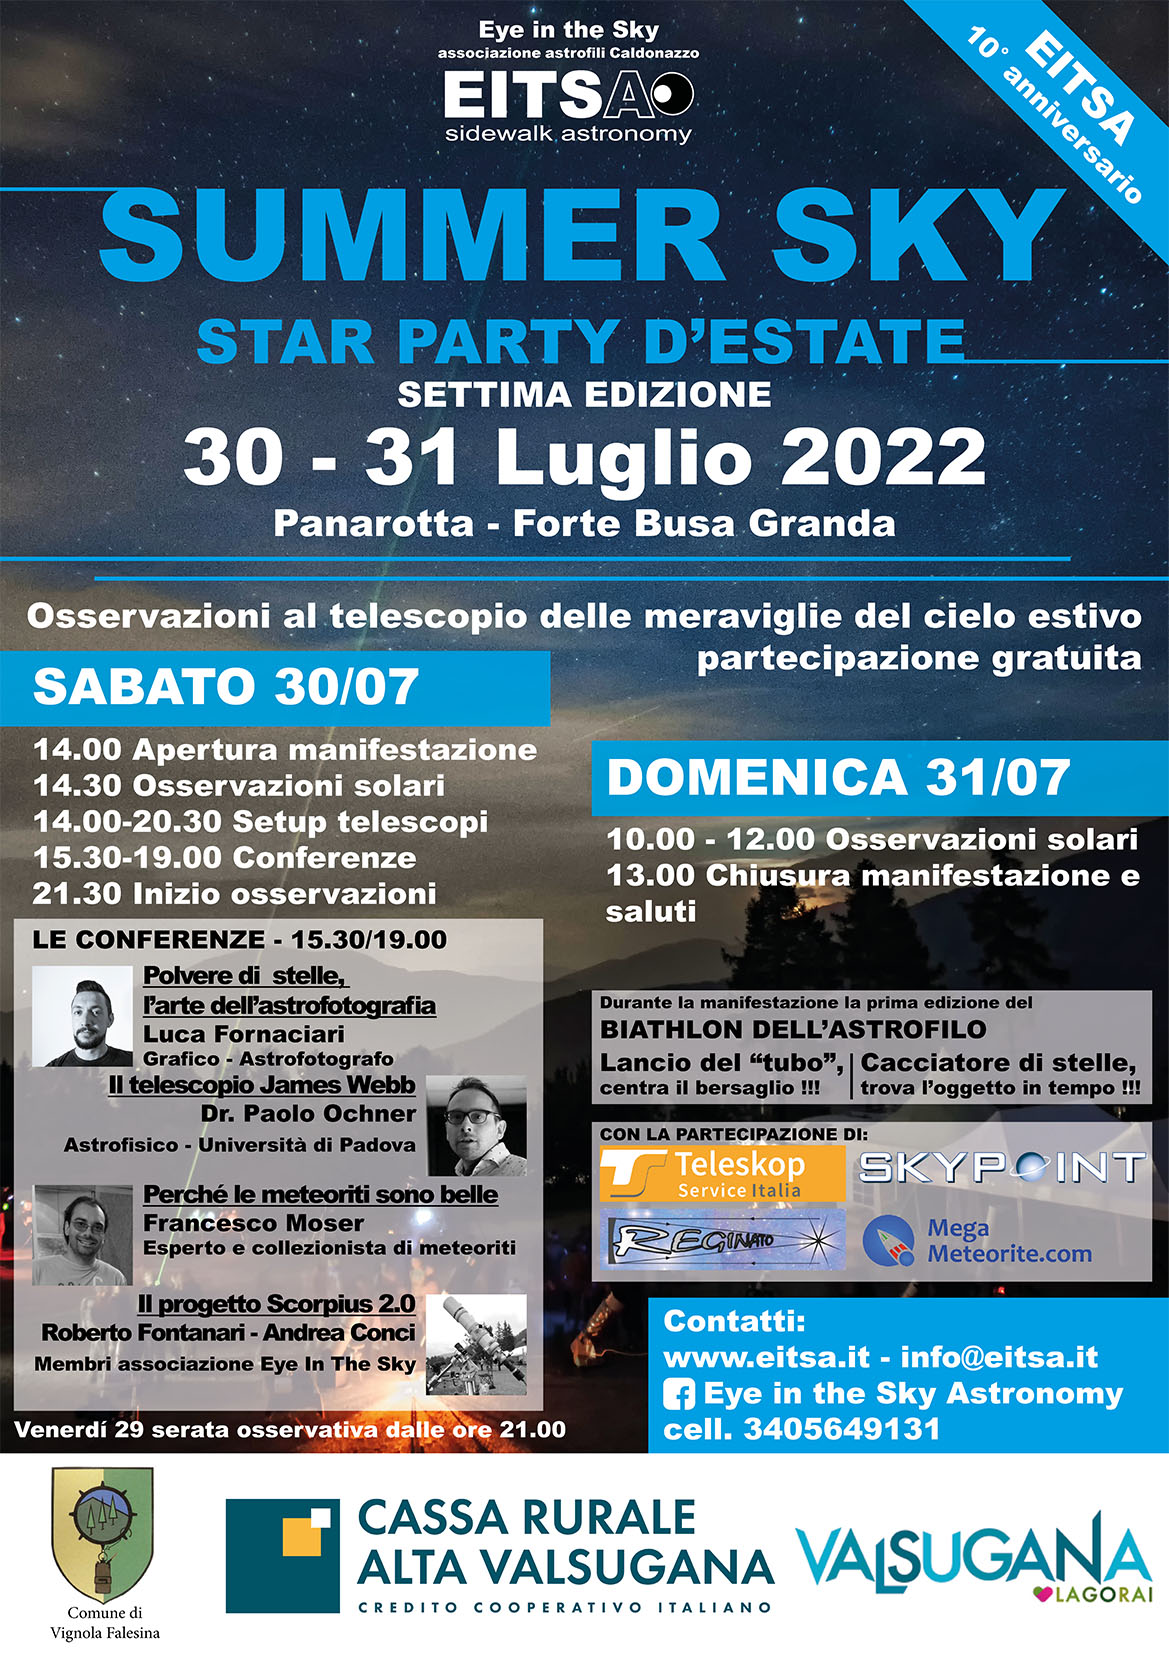 Summersky StarParty d’estate 29-30-31 Luglio 2022 EITSA – Eye in the Sky